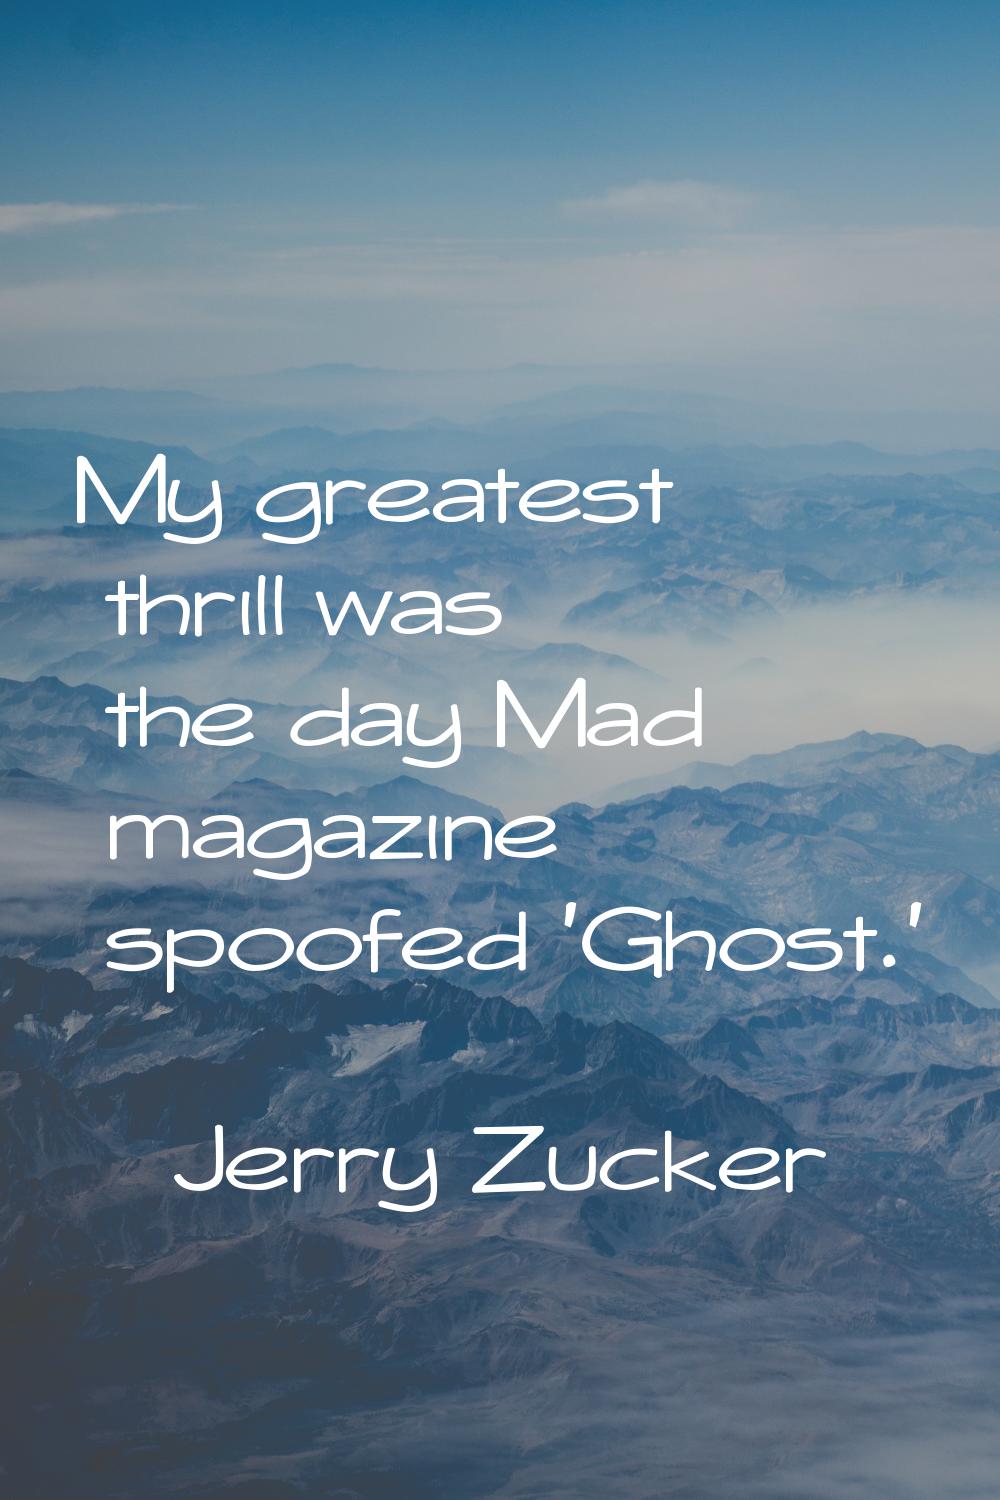 My greatest thrill was the day Mad magazine spoofed 'Ghost.'